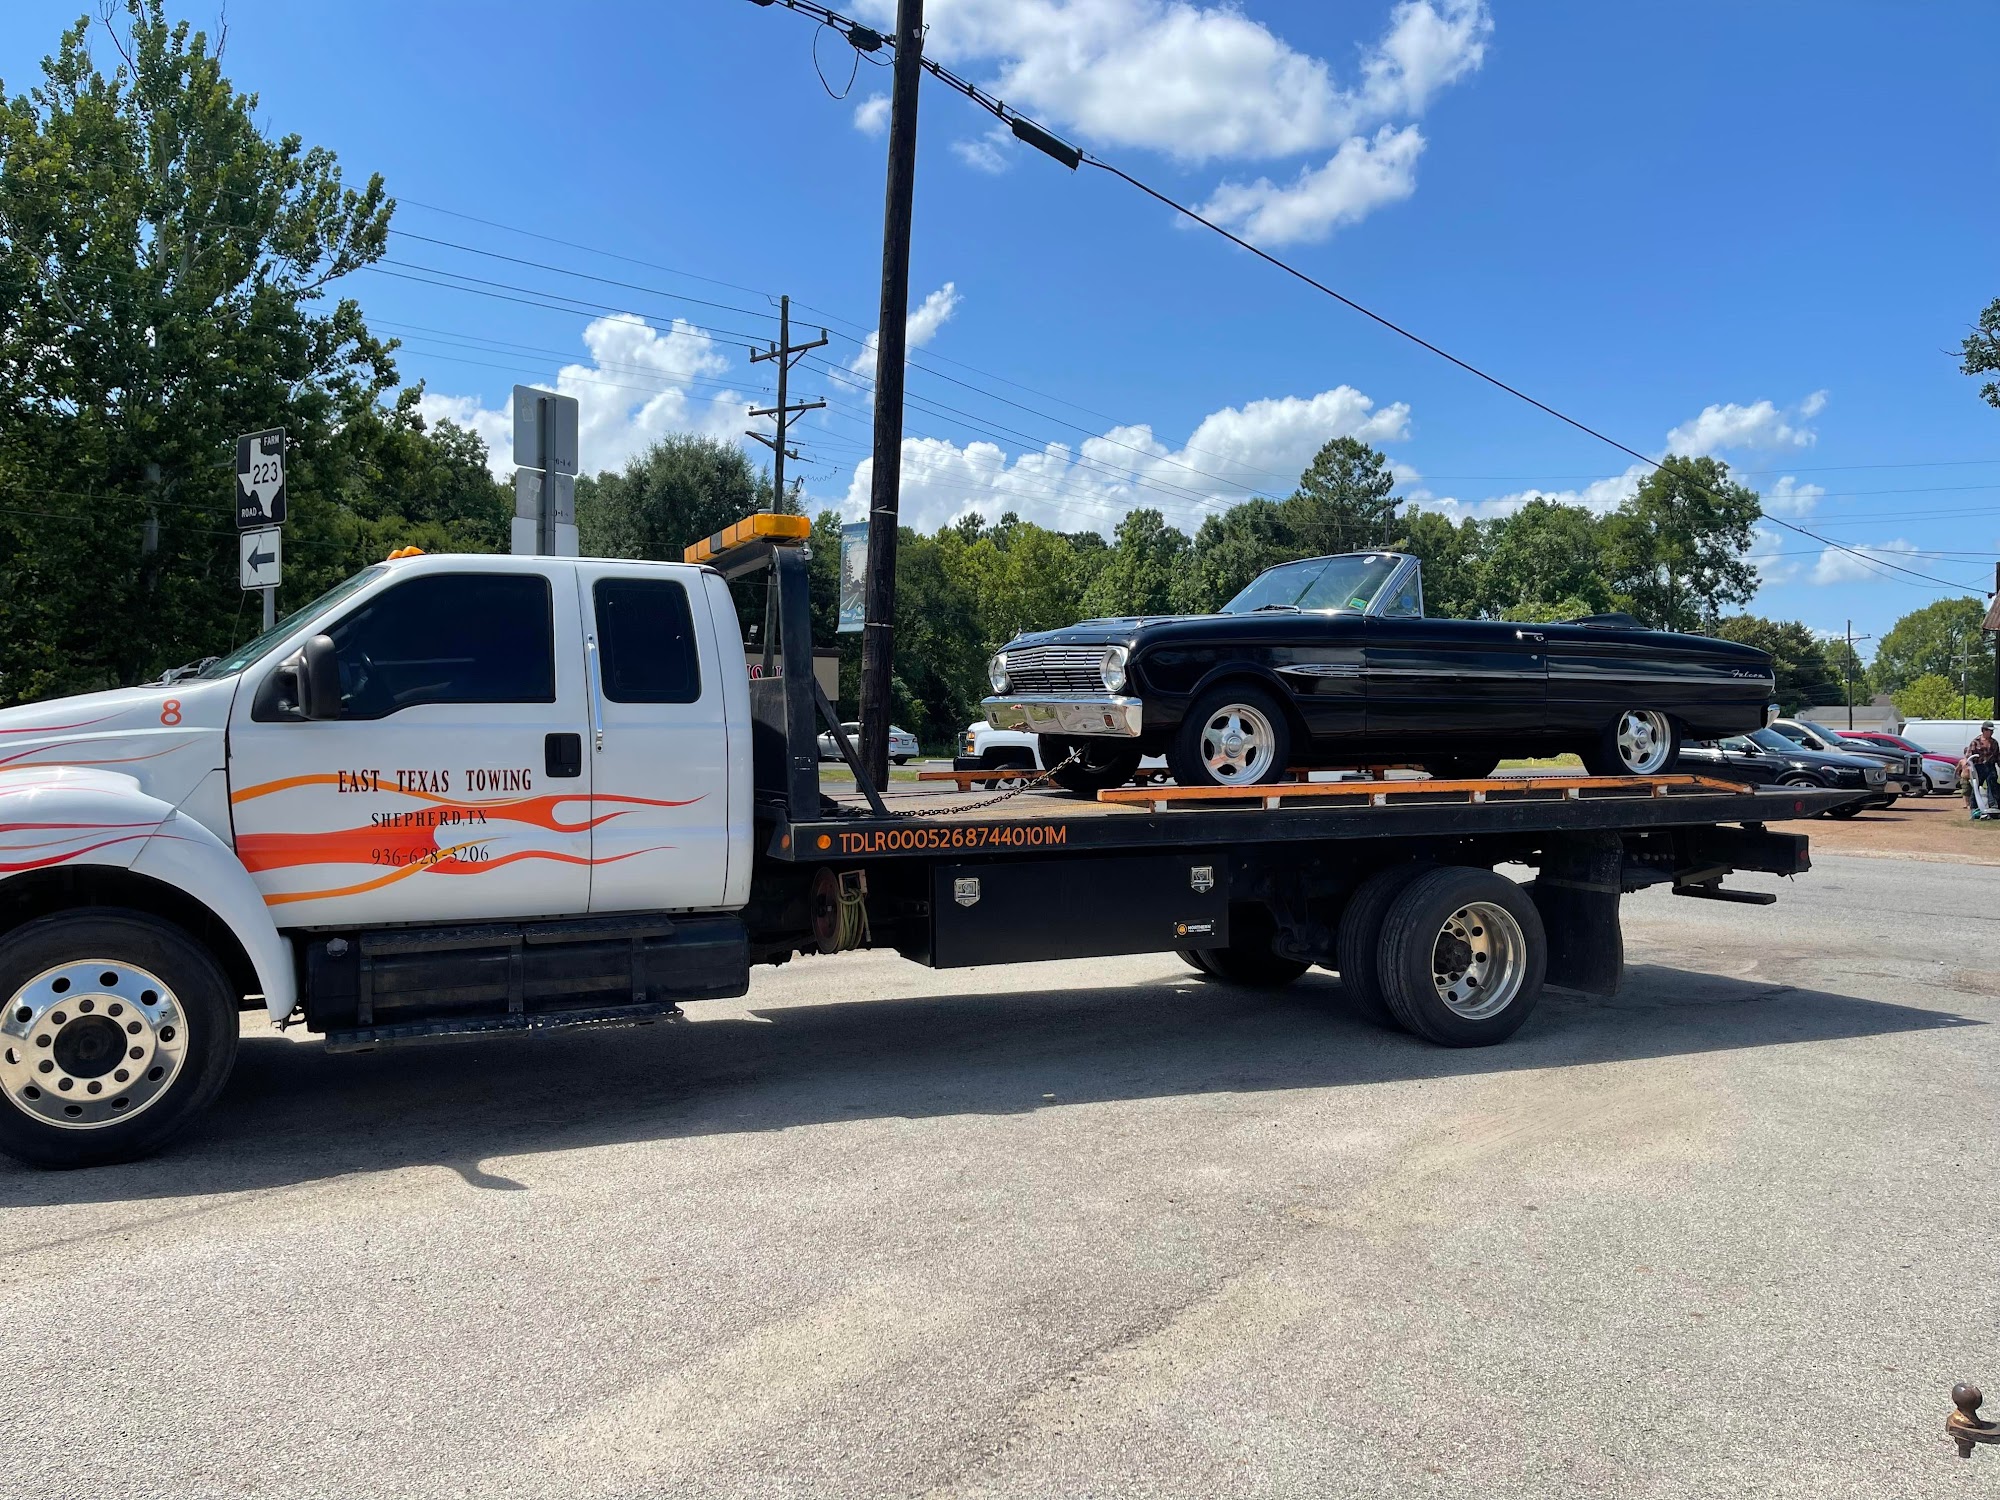 East Texas Towing